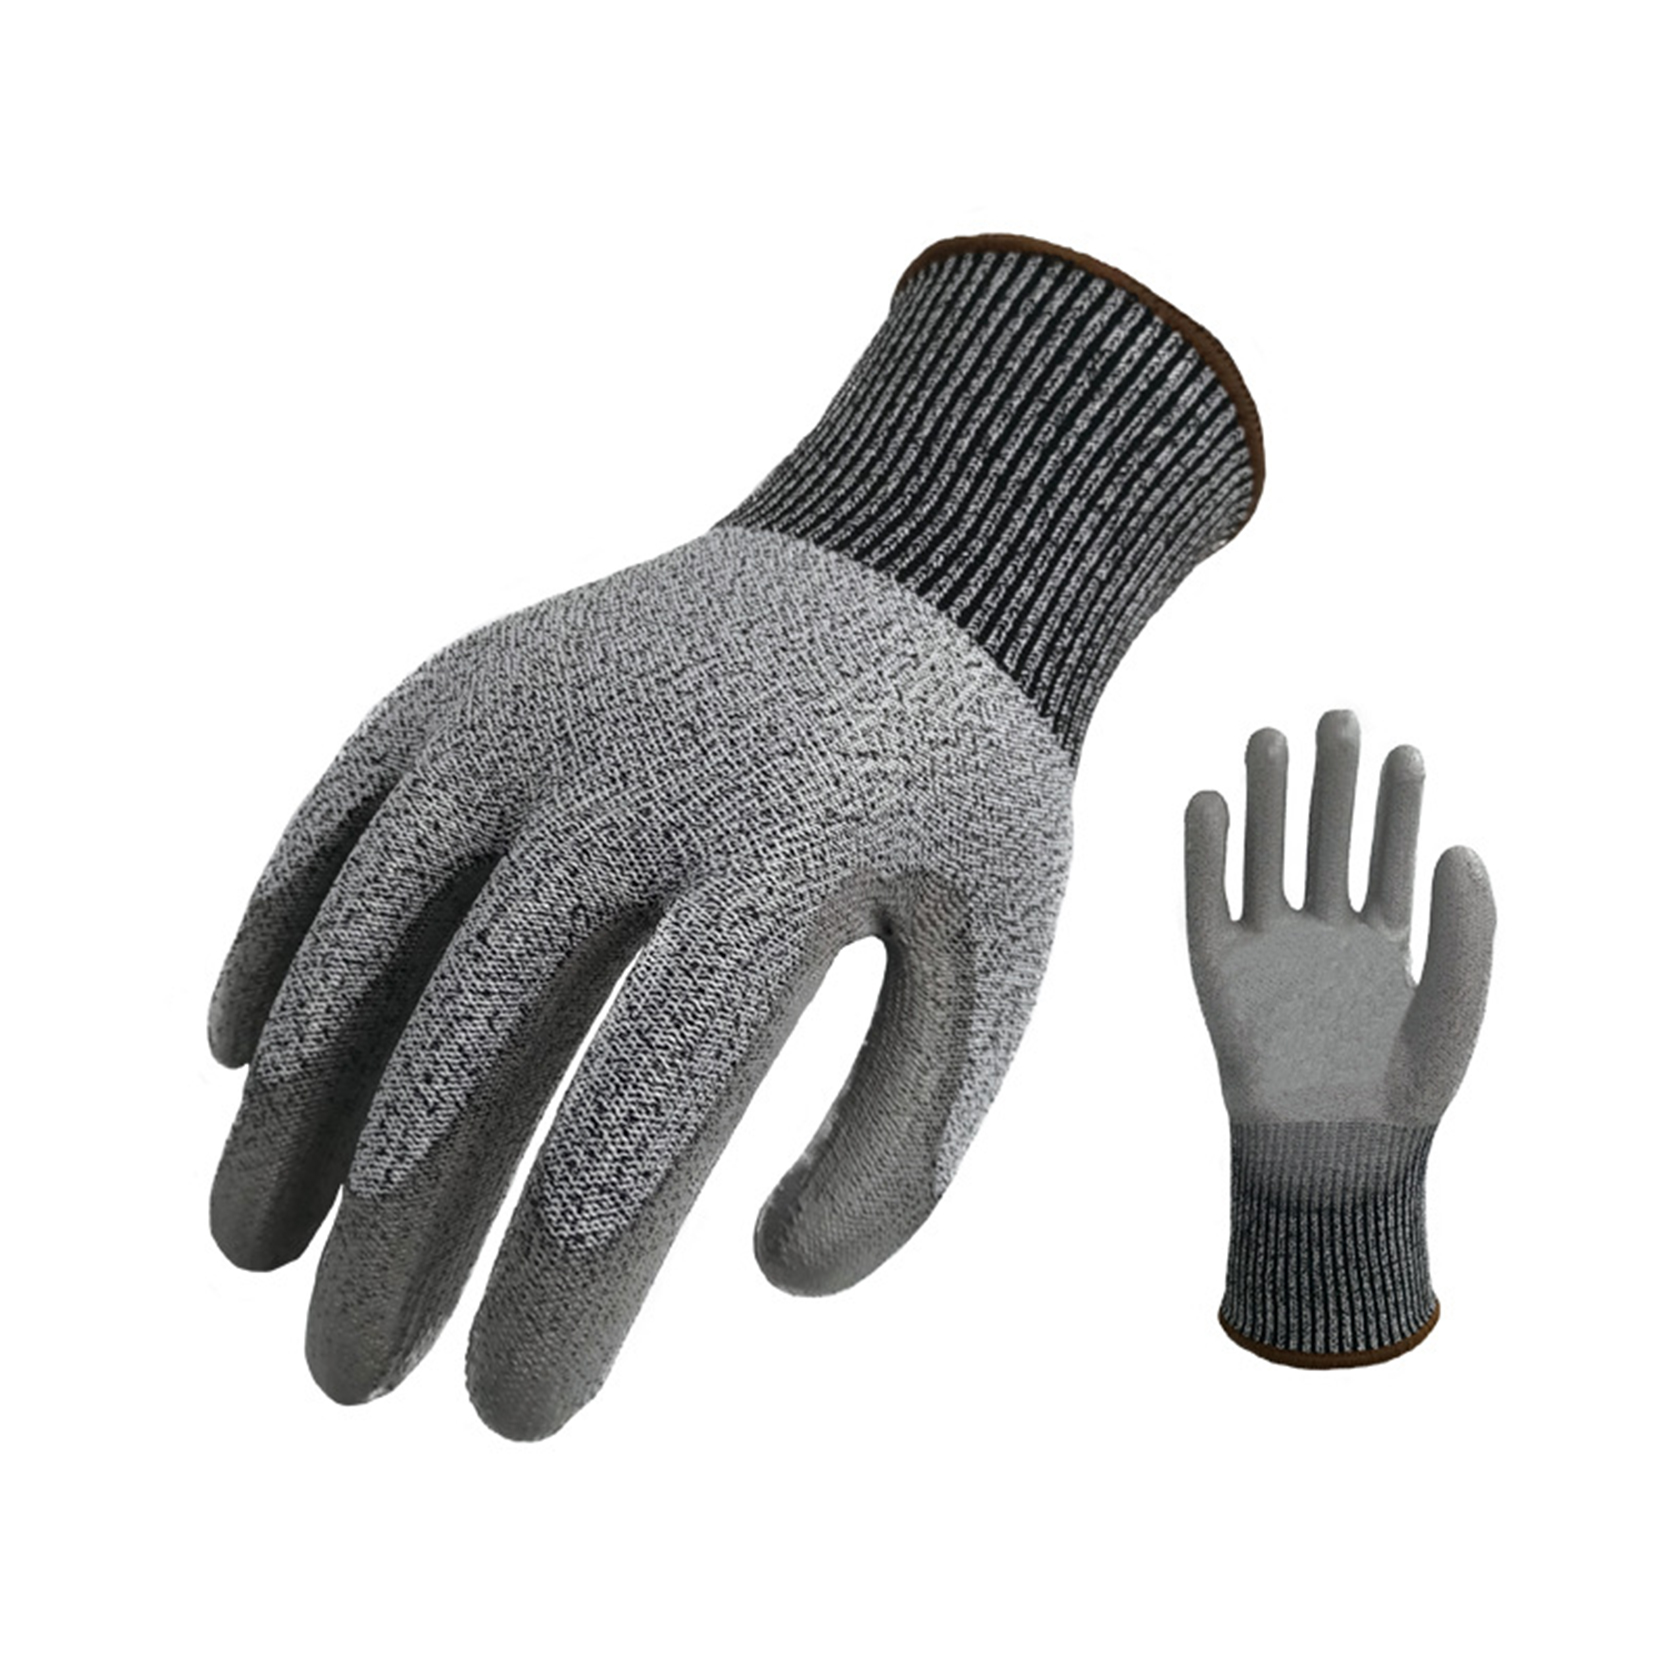 PU Coated Safety Work Gloves Working Gloves with Grip